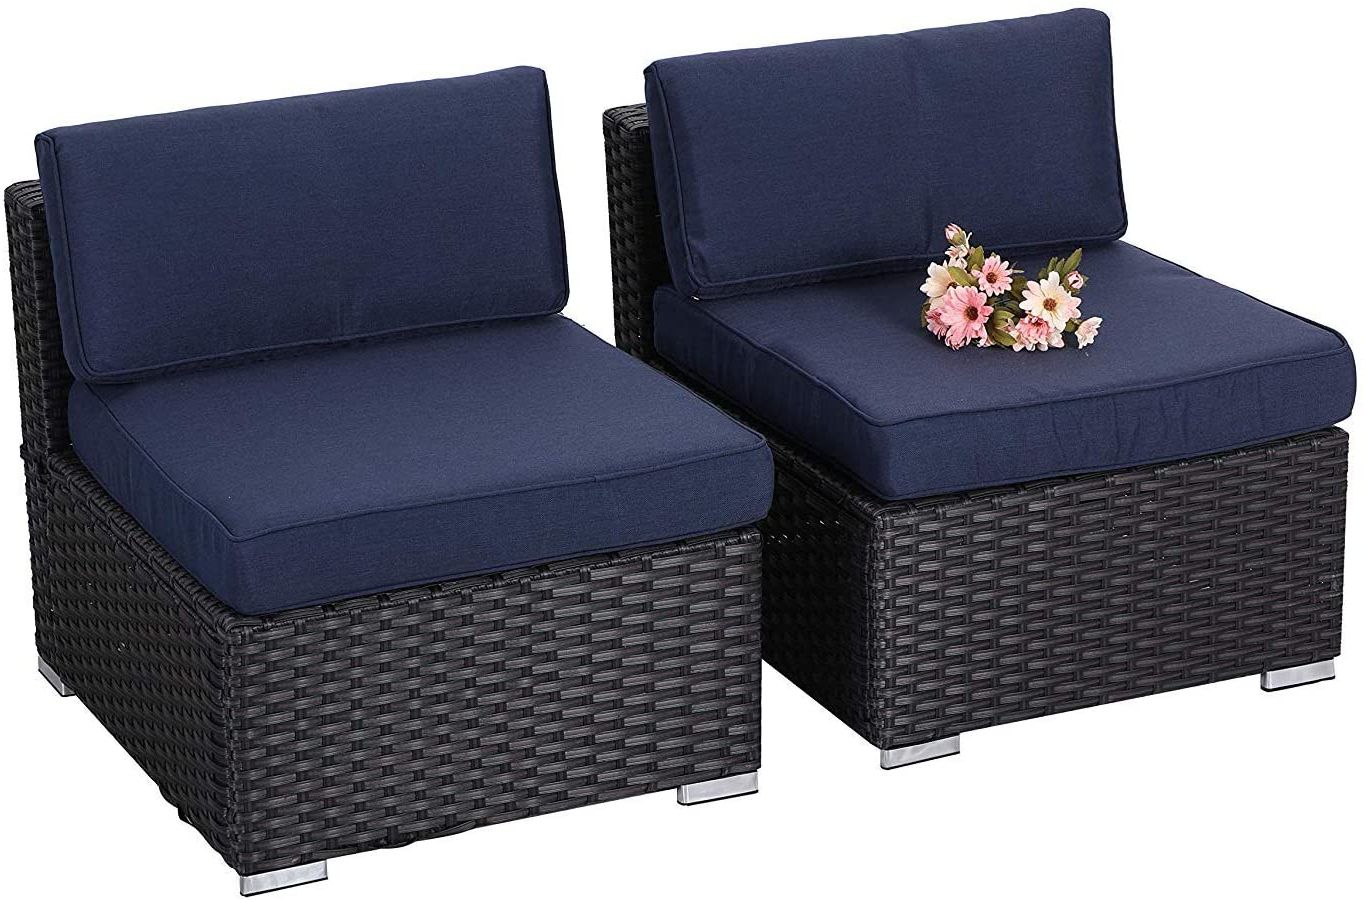 Mf Studio Outdoor Sectional Furniture 2 Piece Patio Sofa Set Low Back Throughout Trendy Navy Outdoor Seating Sectional Patio Sets (View 13 of 15)